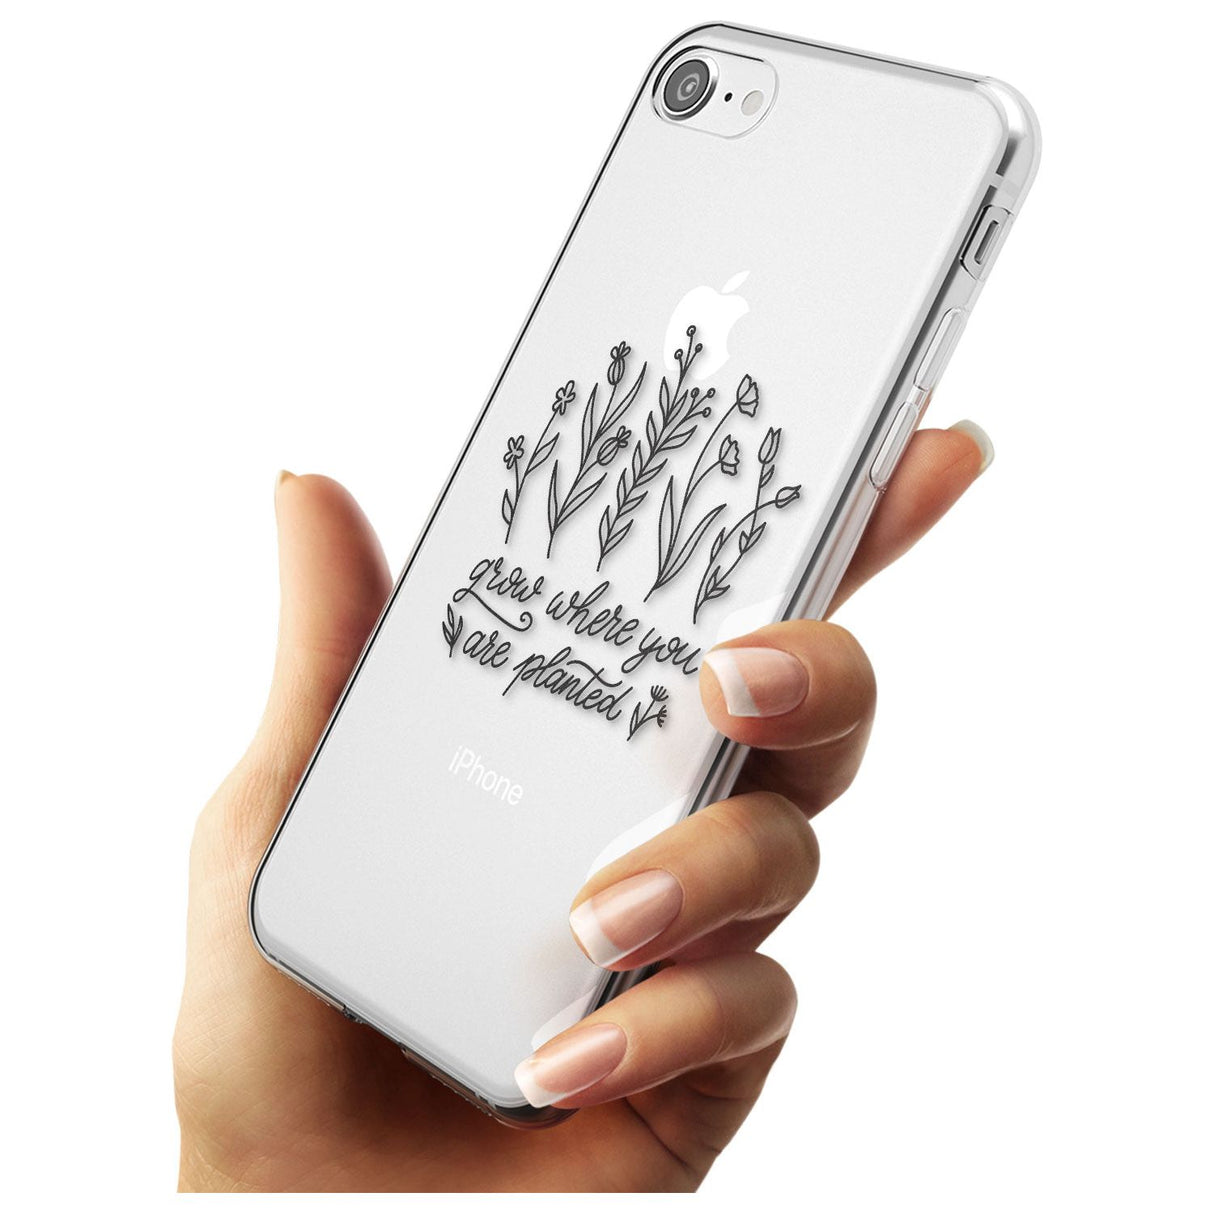 Grow where you are planted Slim TPU Phone Case for iPhone SE 8 7 Plus